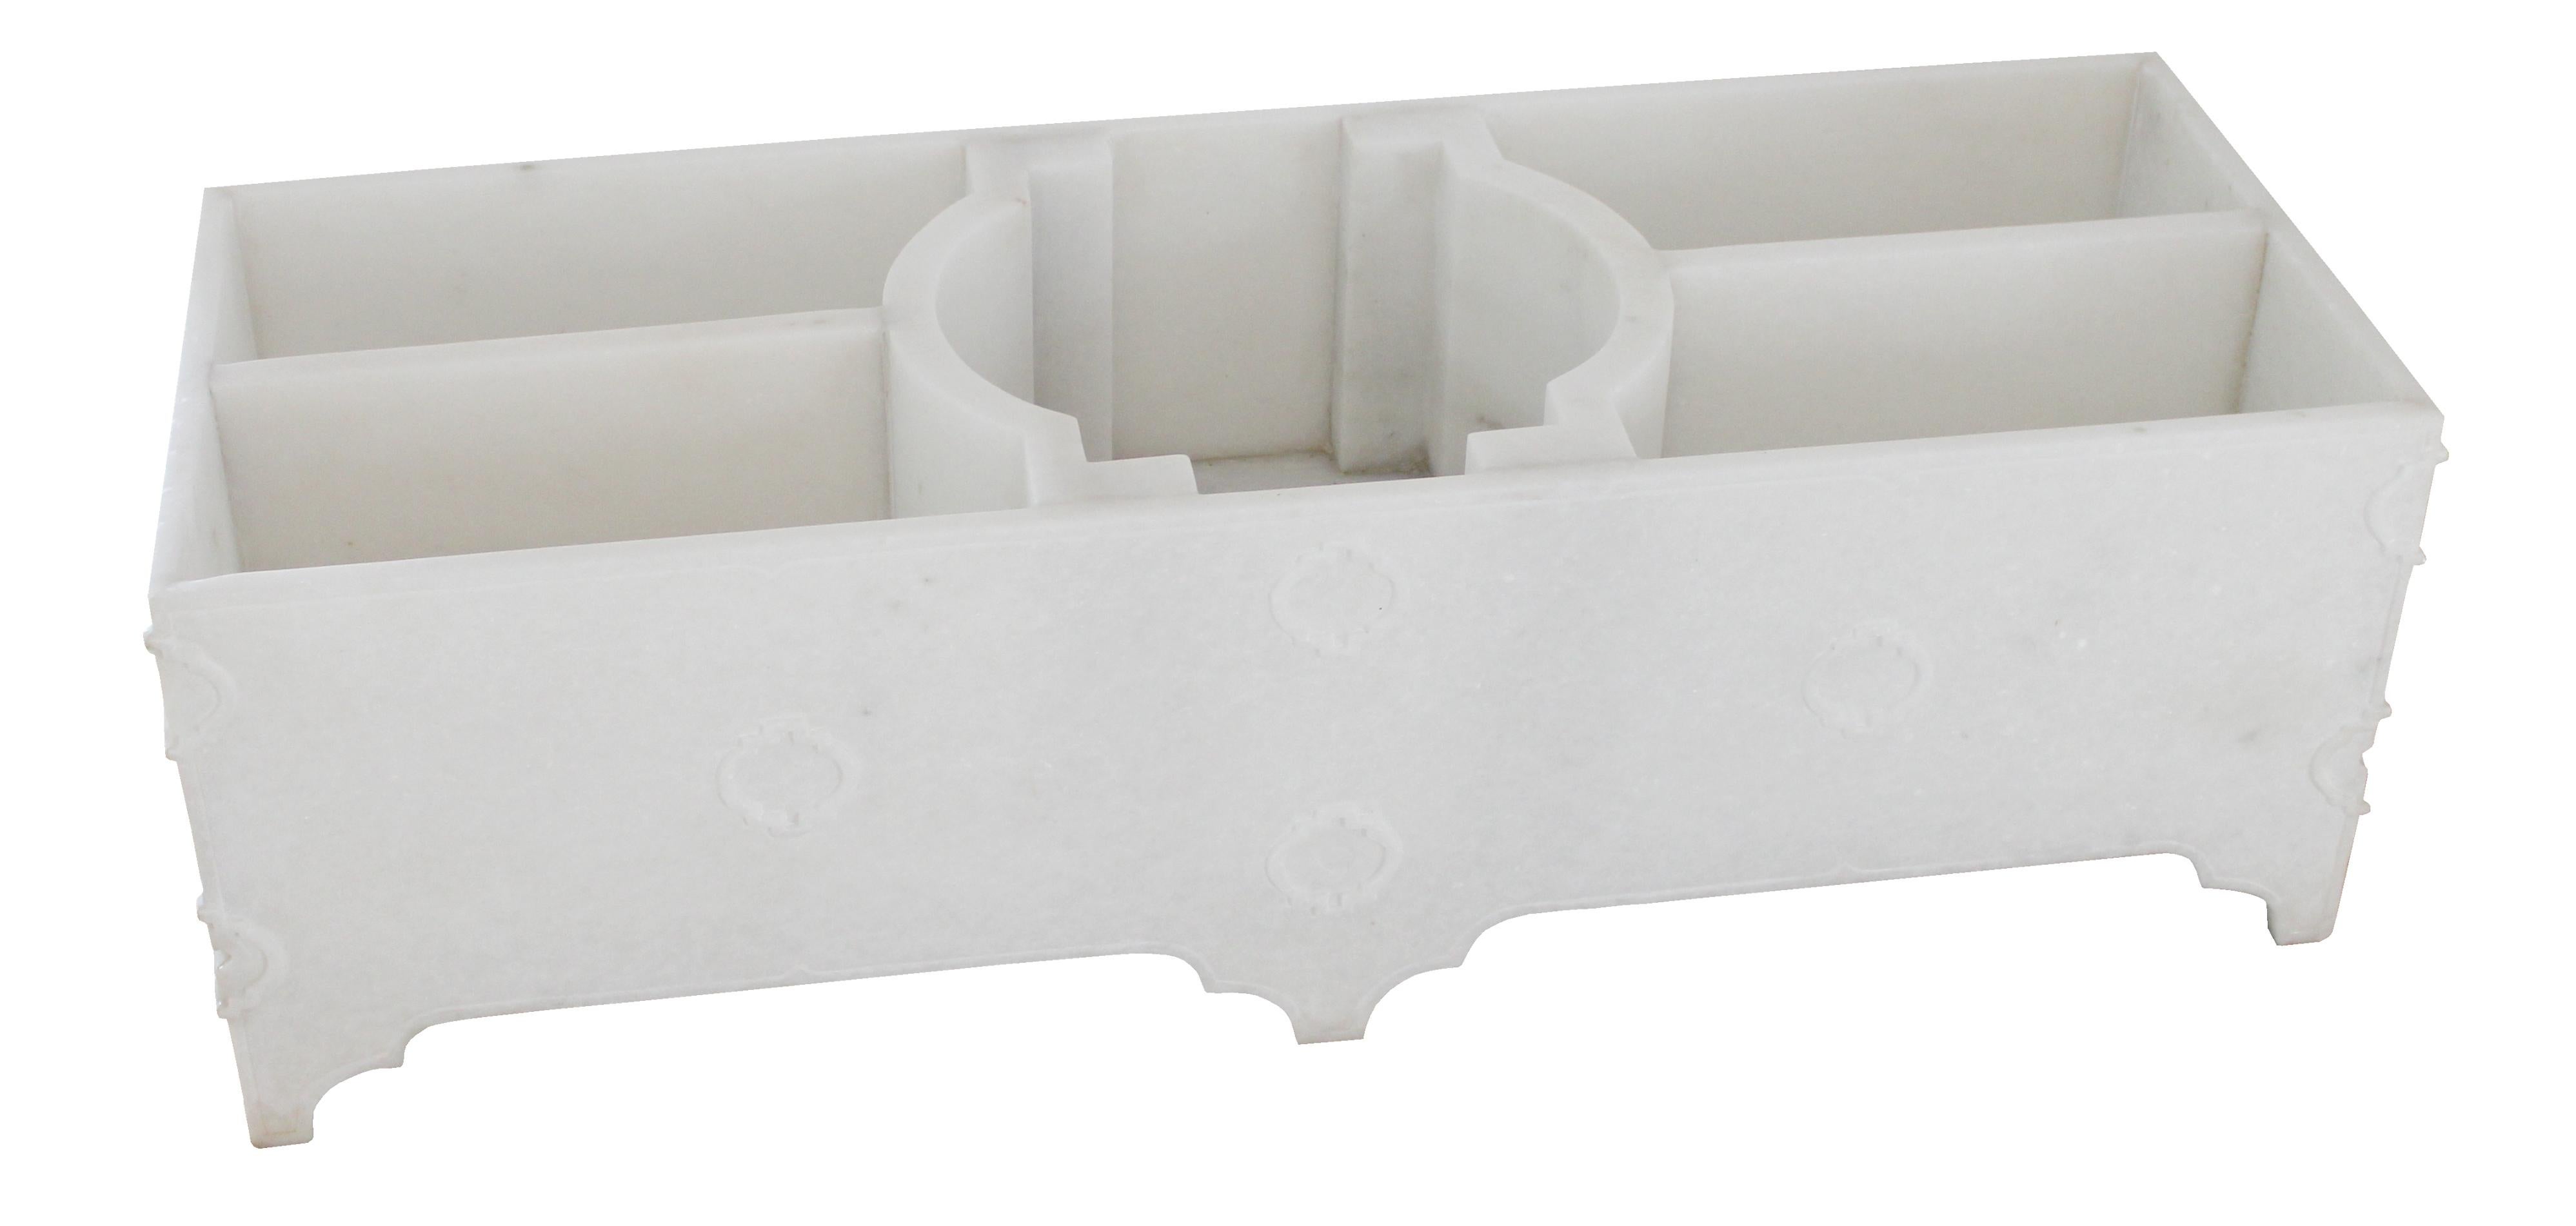 Influenced by 17th century Mughal gardens of Delhi, this planter has hand-carved details from that period. Hand-carved out of marble.Designed by Paul Mathieu for Stephanie Odegard.

Jardin Planter in White Marble 
Size- 33